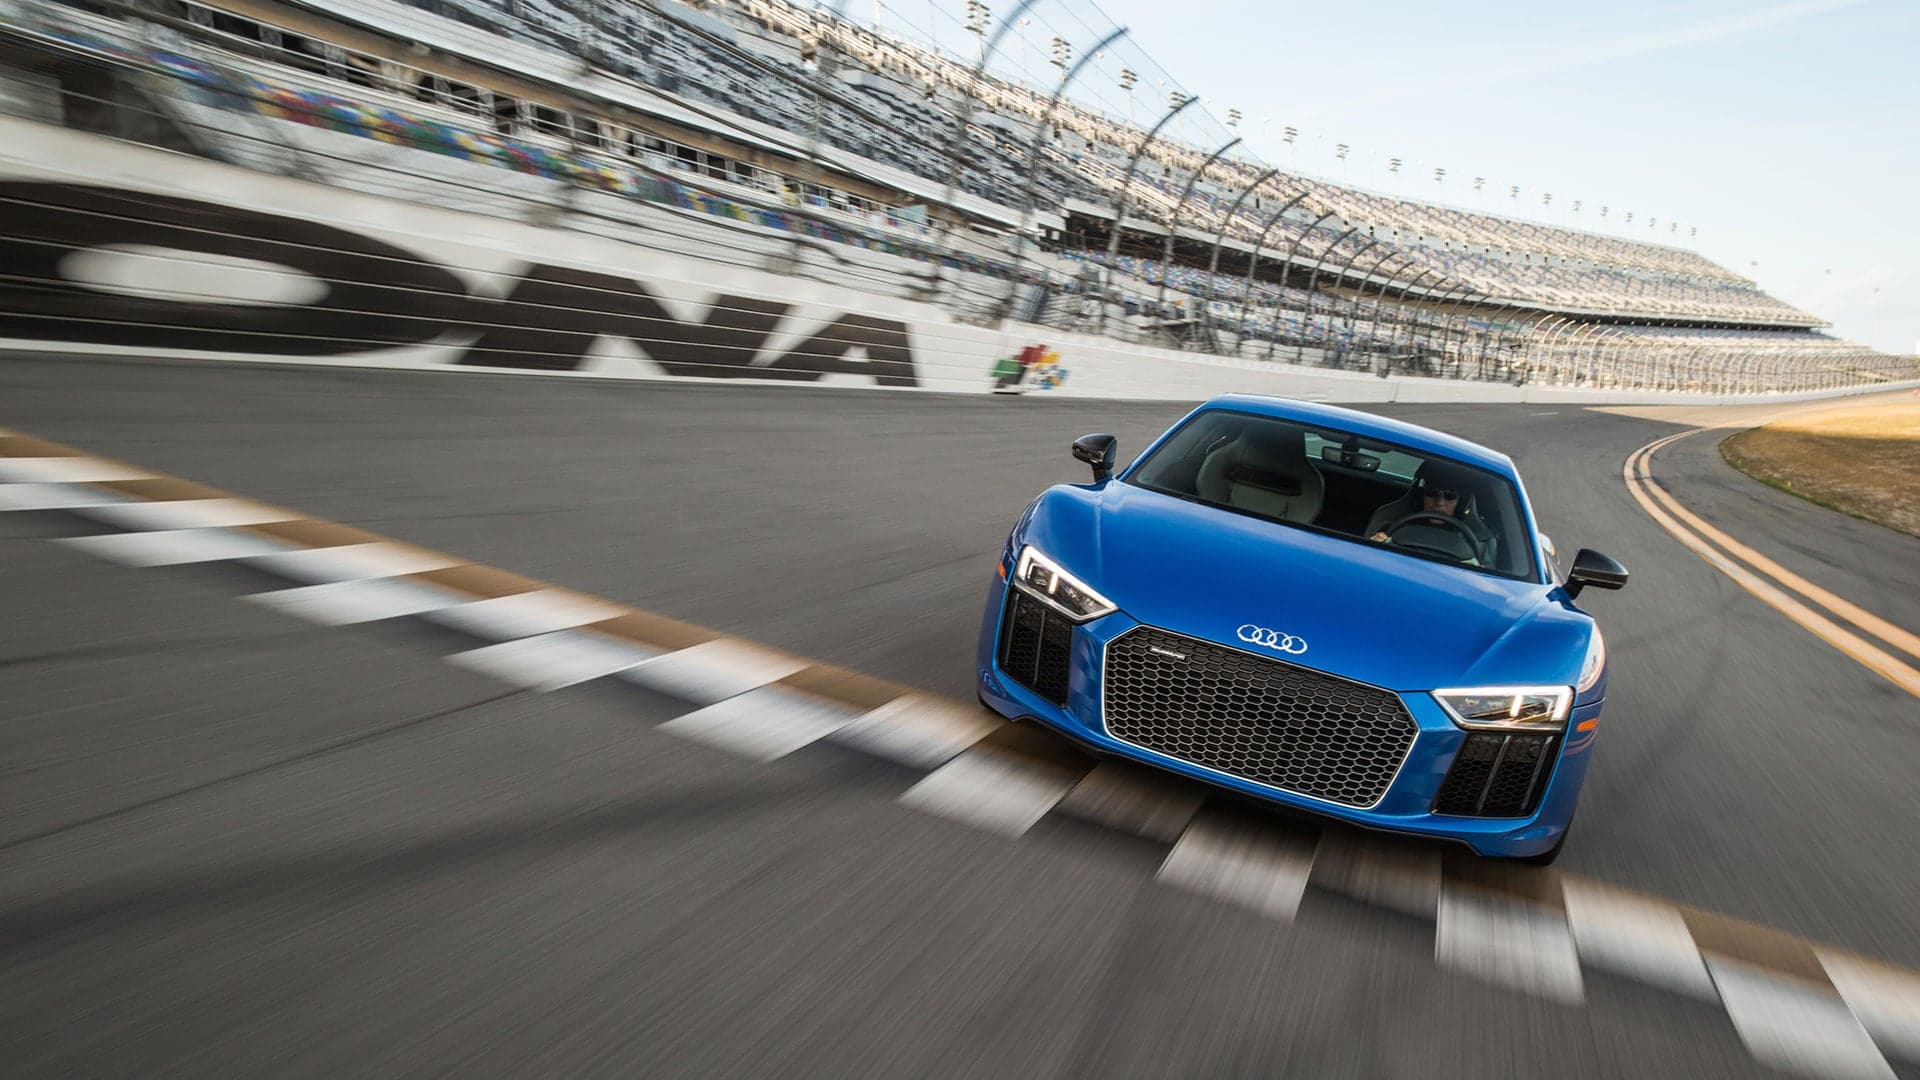 Lawrence Ulrich Drives the Audi R8 to 180 mph at Daytona